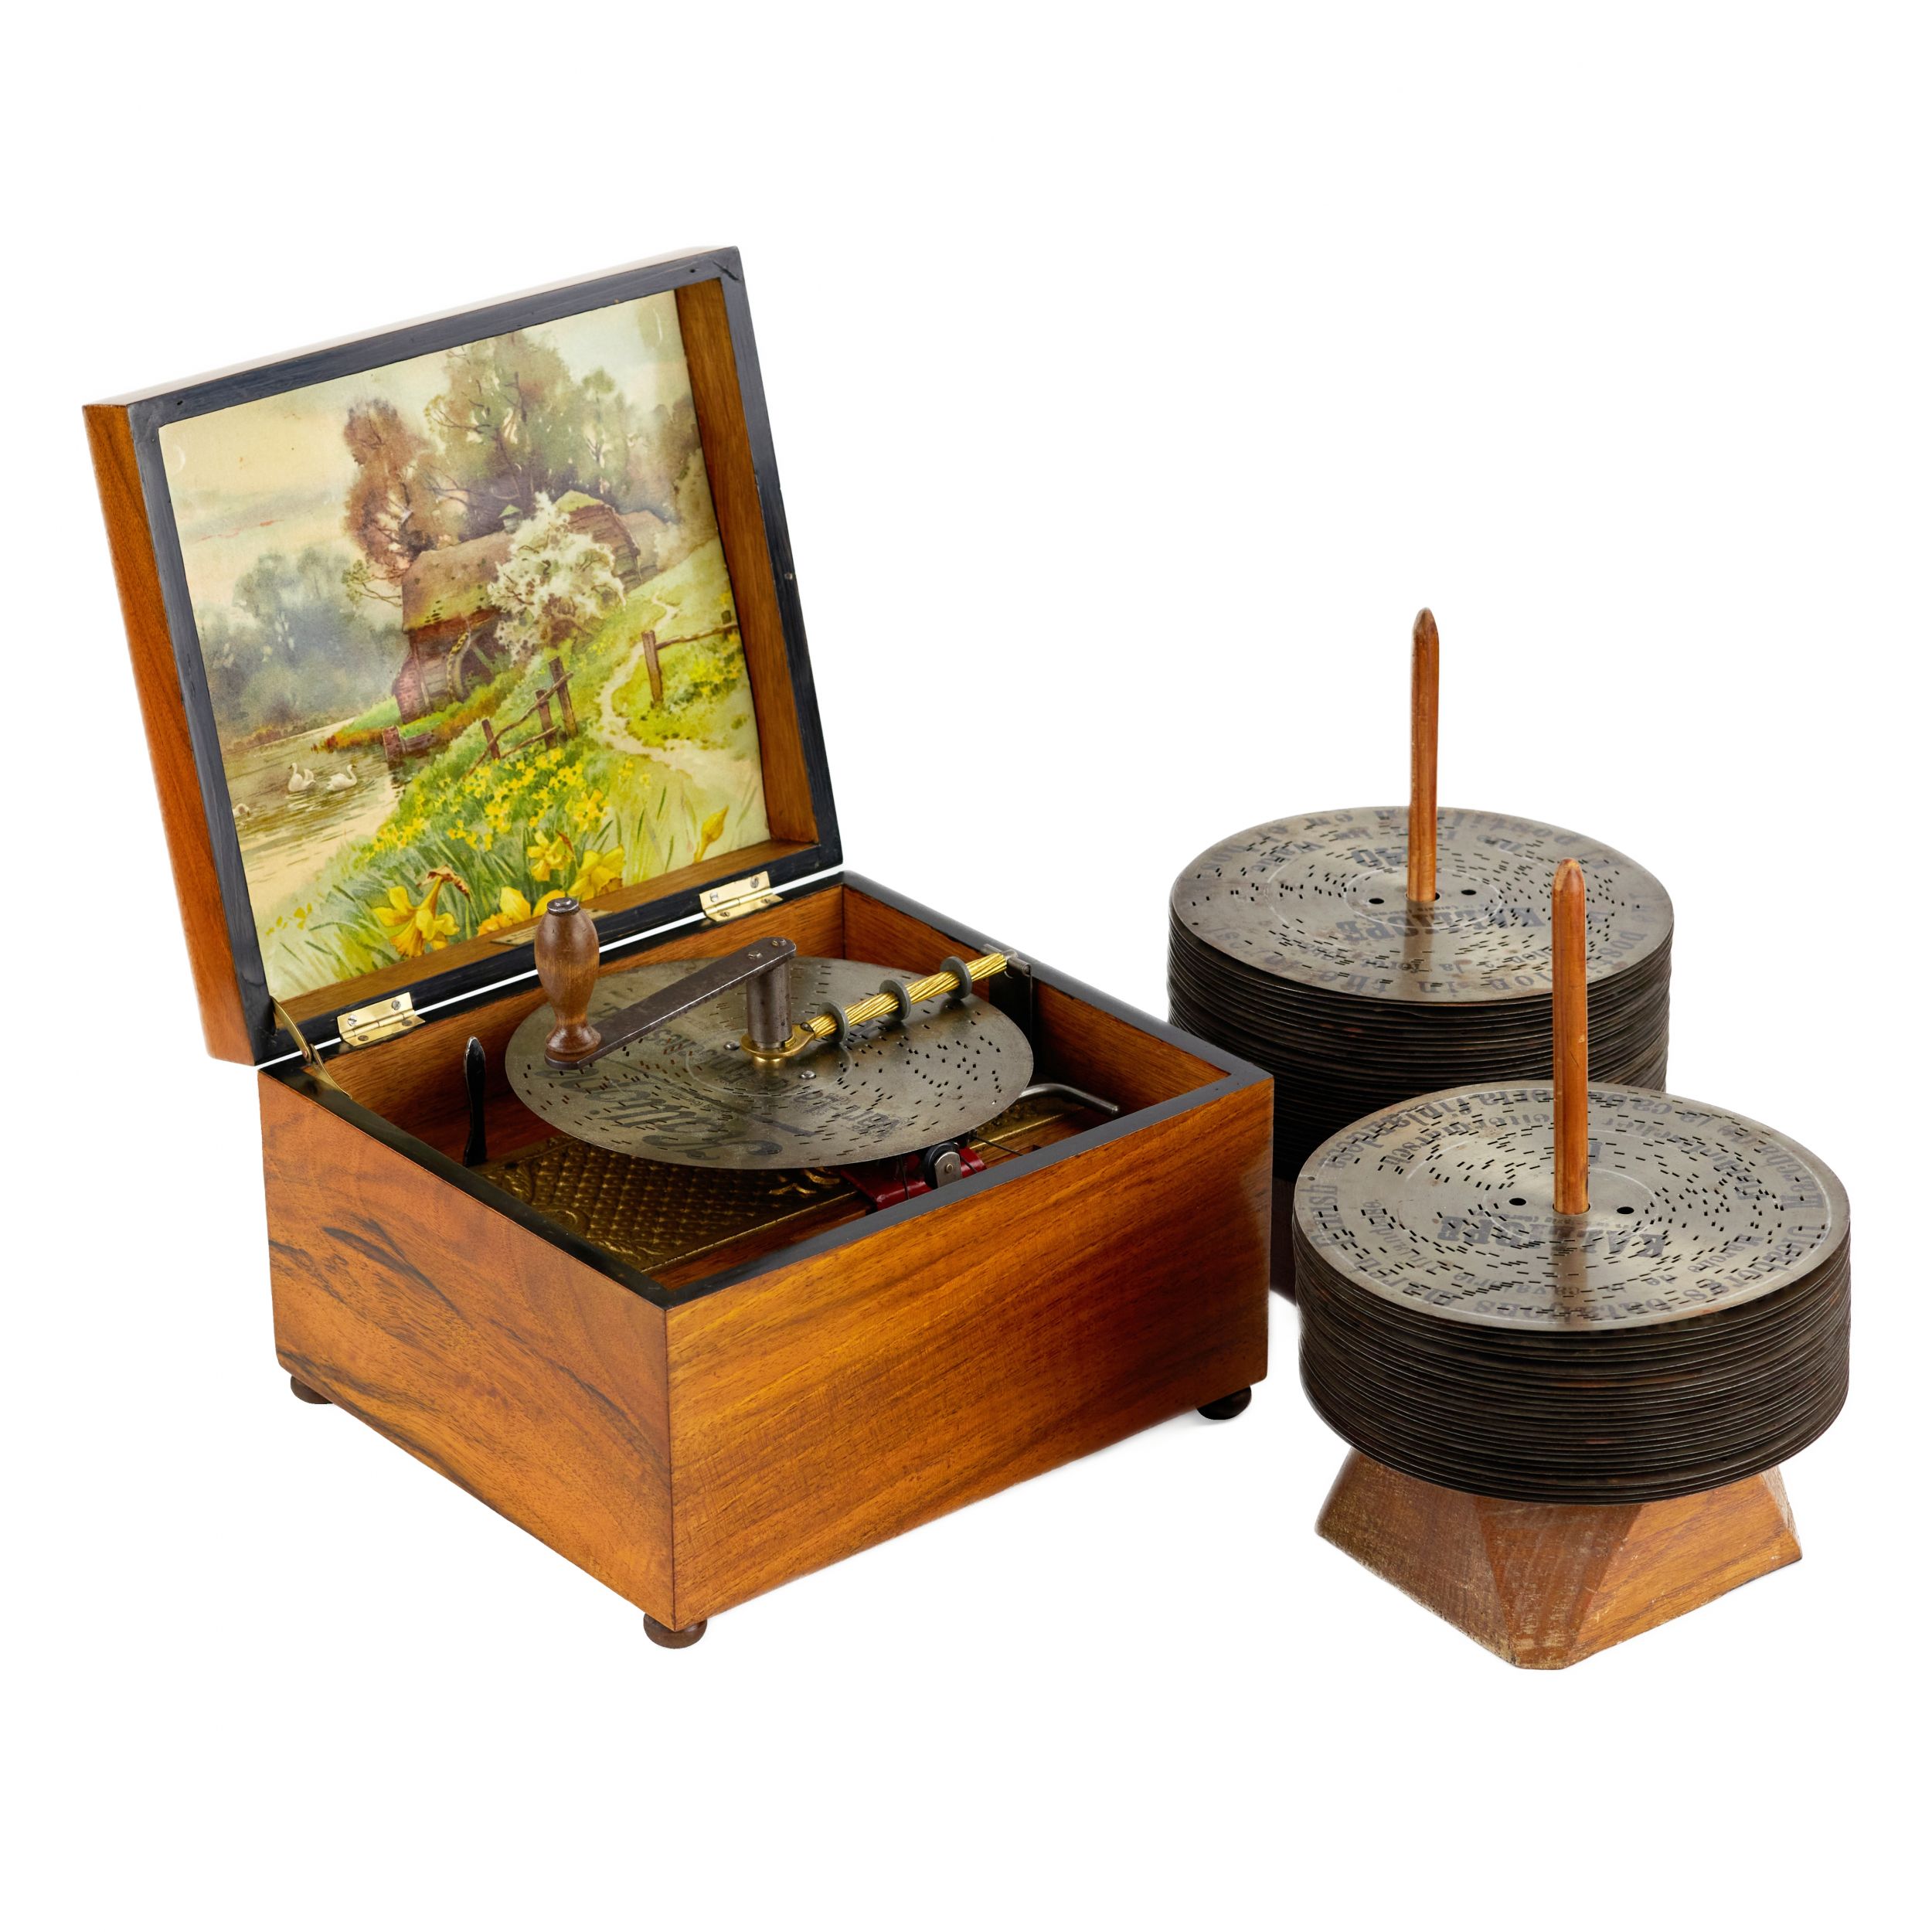 Robert-Wachtler-Disk-music-box-of-the-19th-century-with-bells-and-sixty-records-